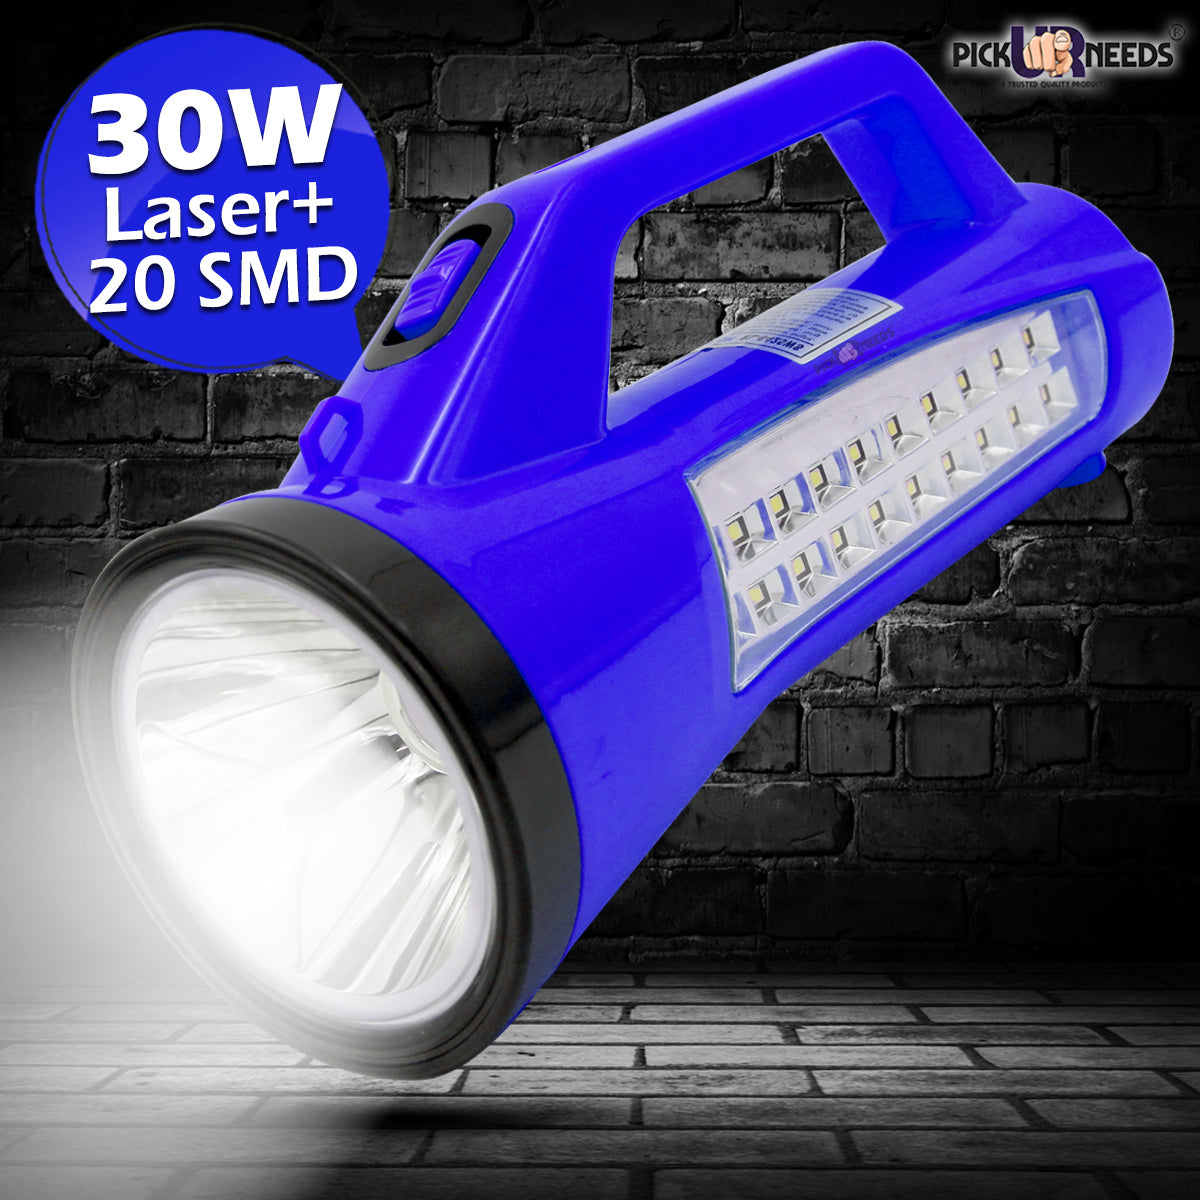 Pick Ur Needs Rechargeable 25W Laser 20 SMD LED Torch With 5 hrs Torch Emergency Light